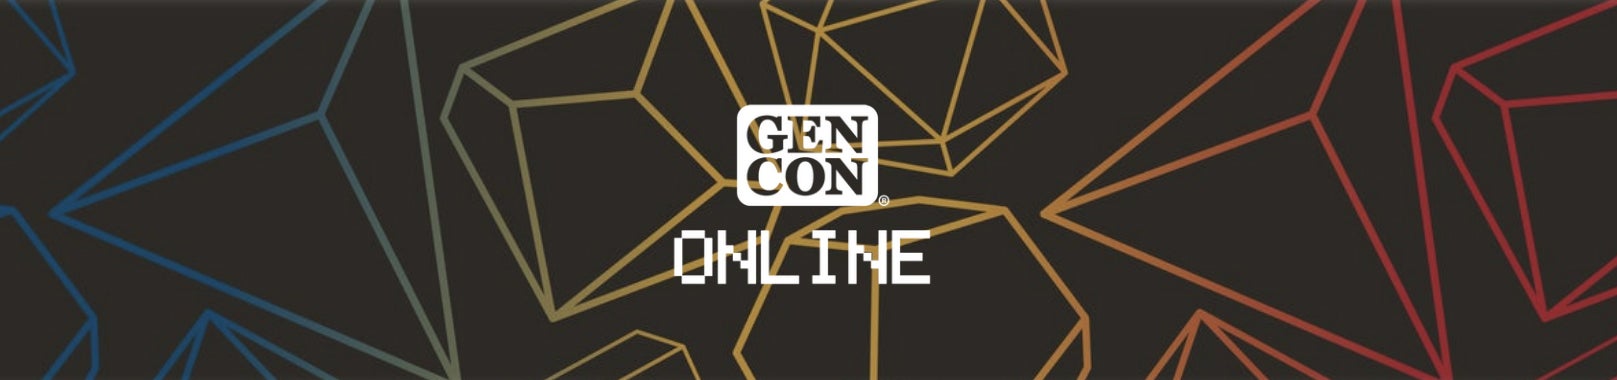 White GenCon Online logo over a black background with rainbow colored dice